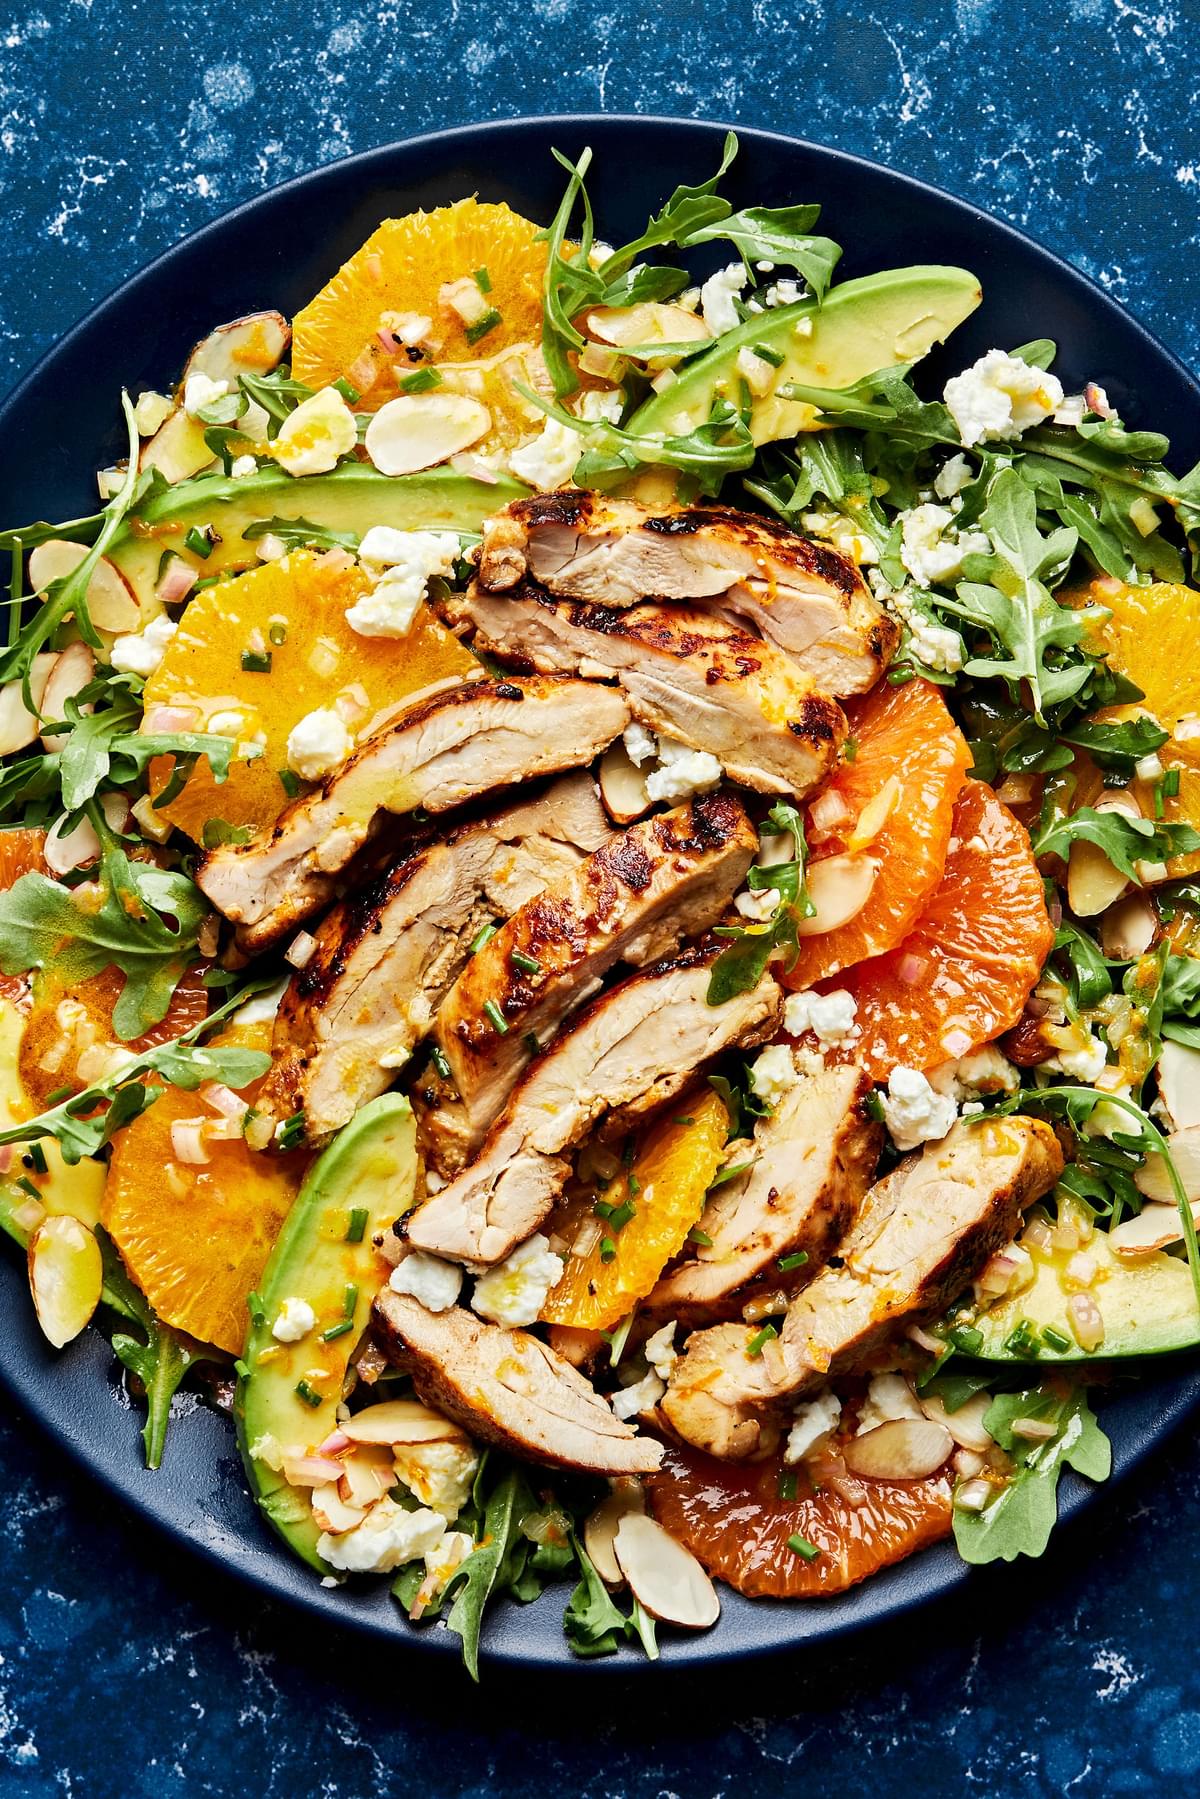 arugula drizzled with citrus dressing topped with chicken, avocado, feta, orange, almonds and chives